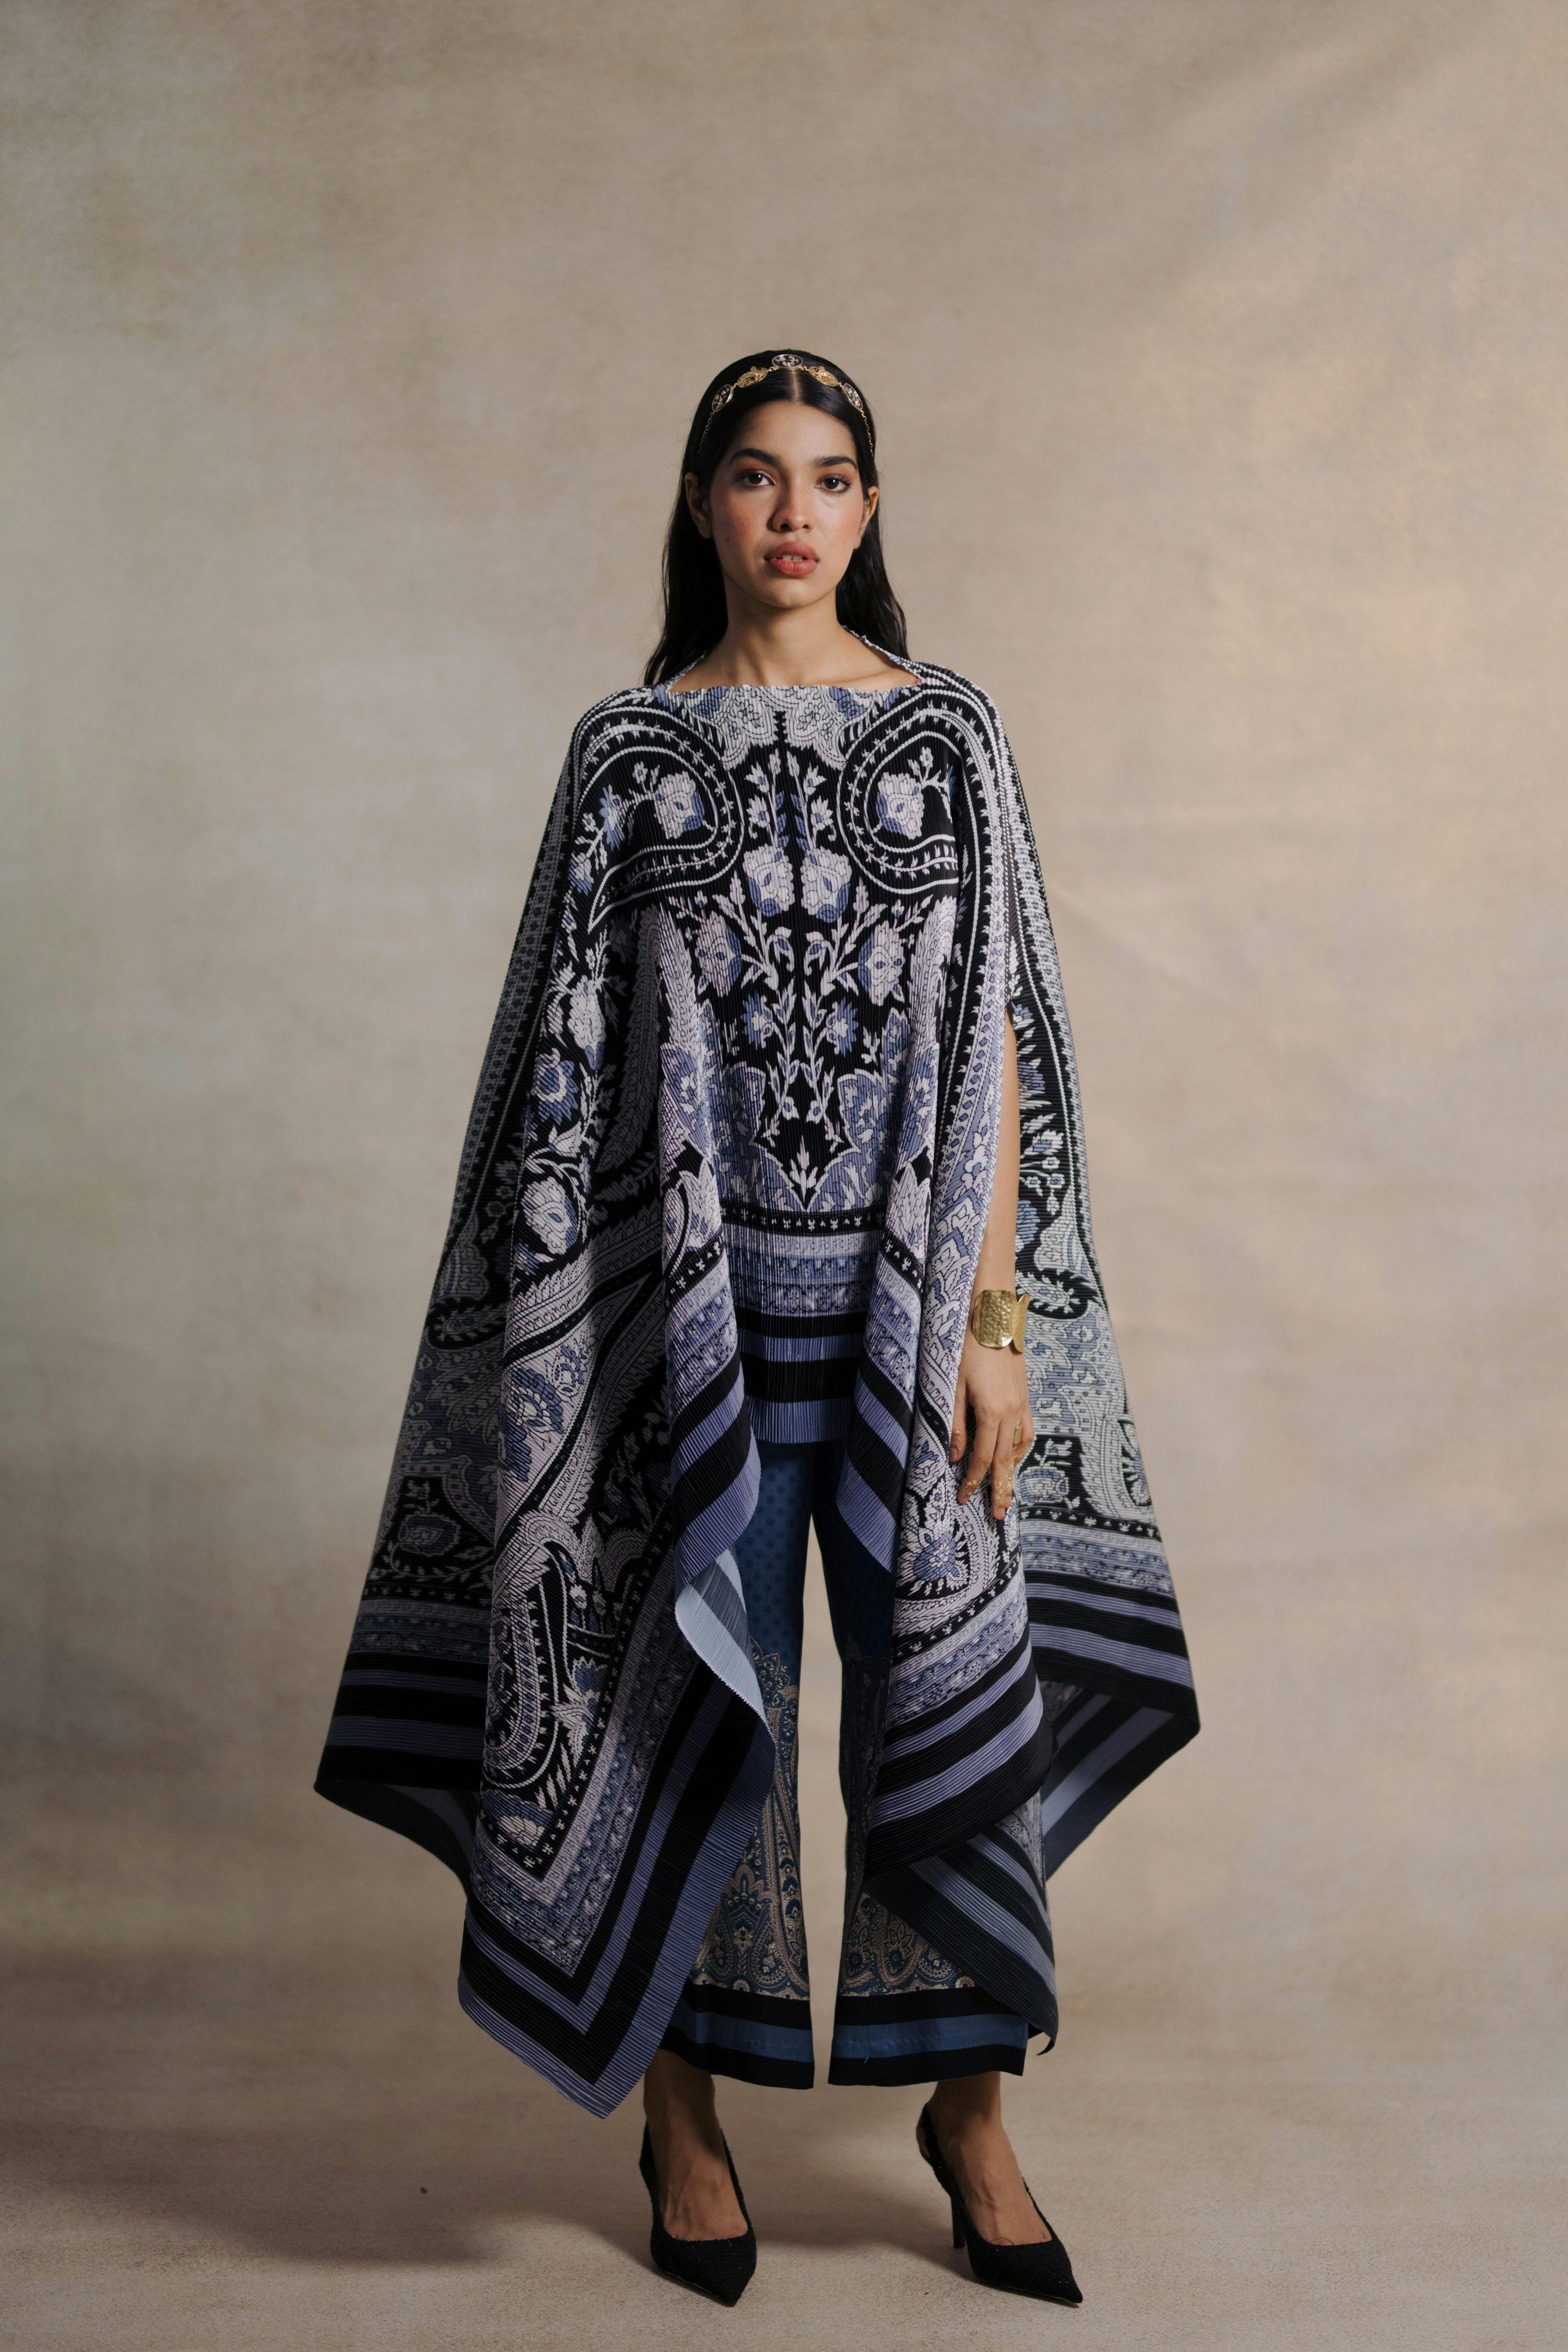 Talisman Cape , a product by Moh India